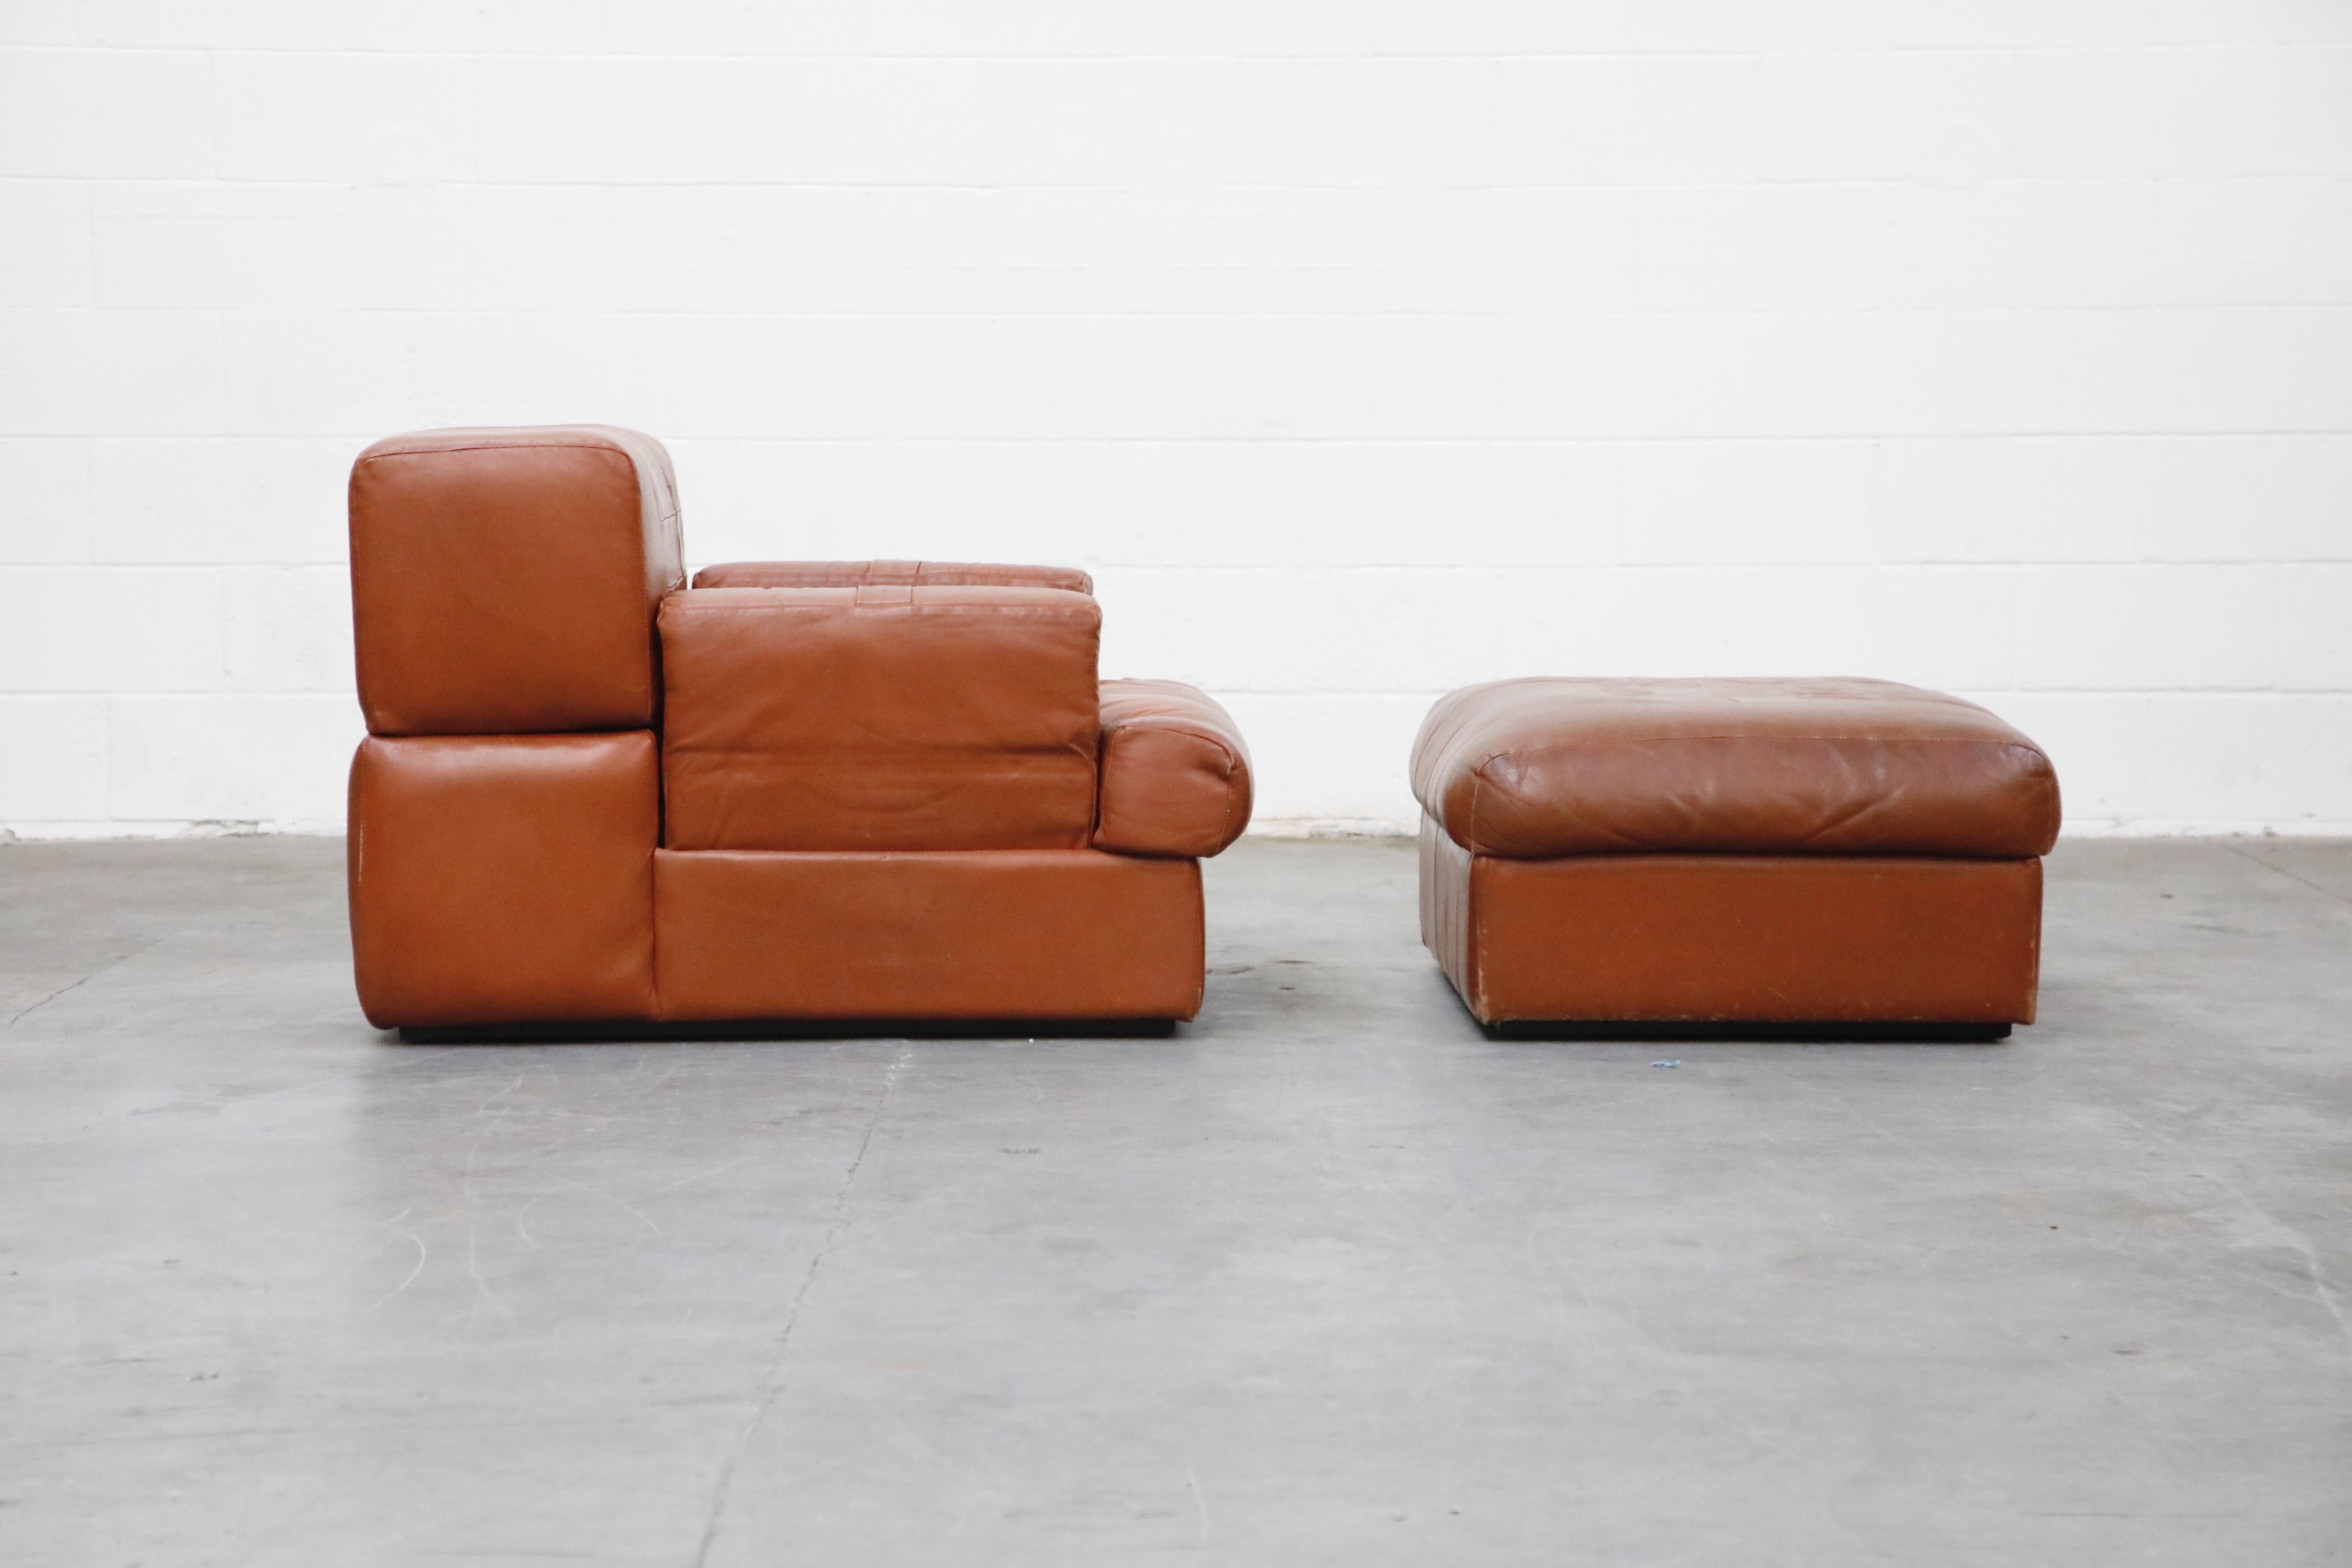 Mid-20th Century Percival Lafer Adjustable Leather Armchair and Ottoman, Brazil, circa 1960